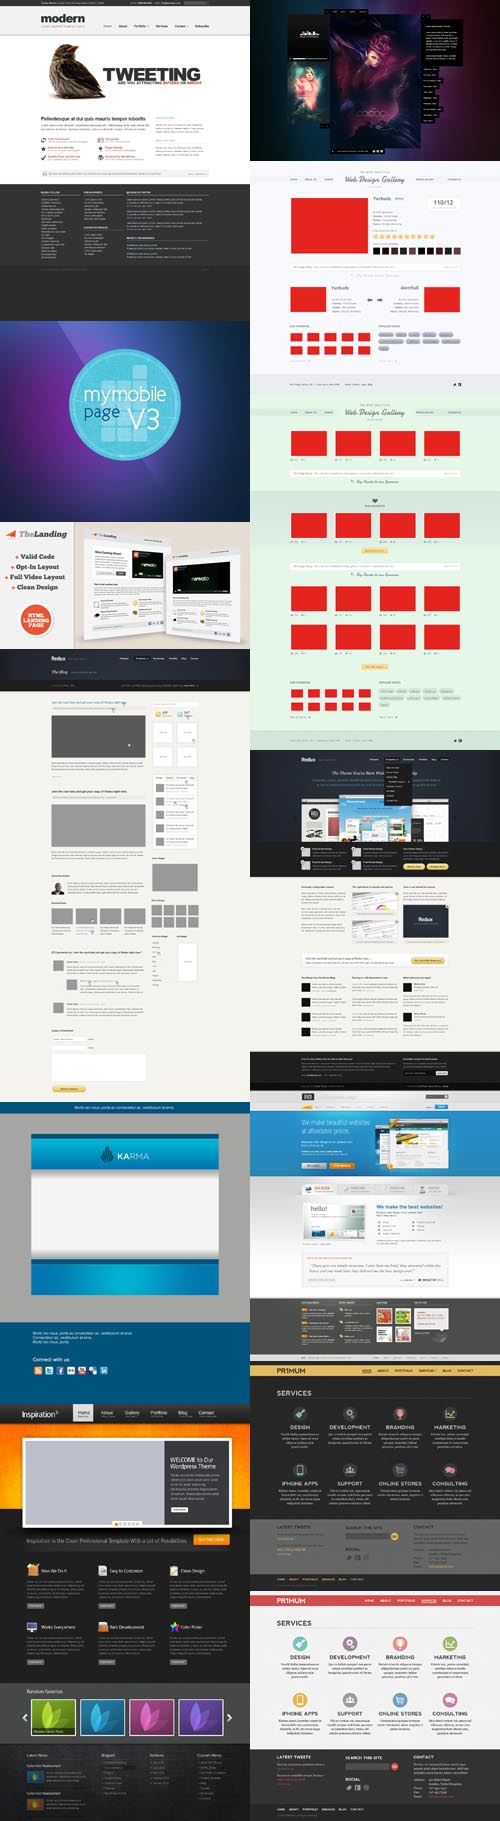 Web Design Gallery Psd Collection Template Pack